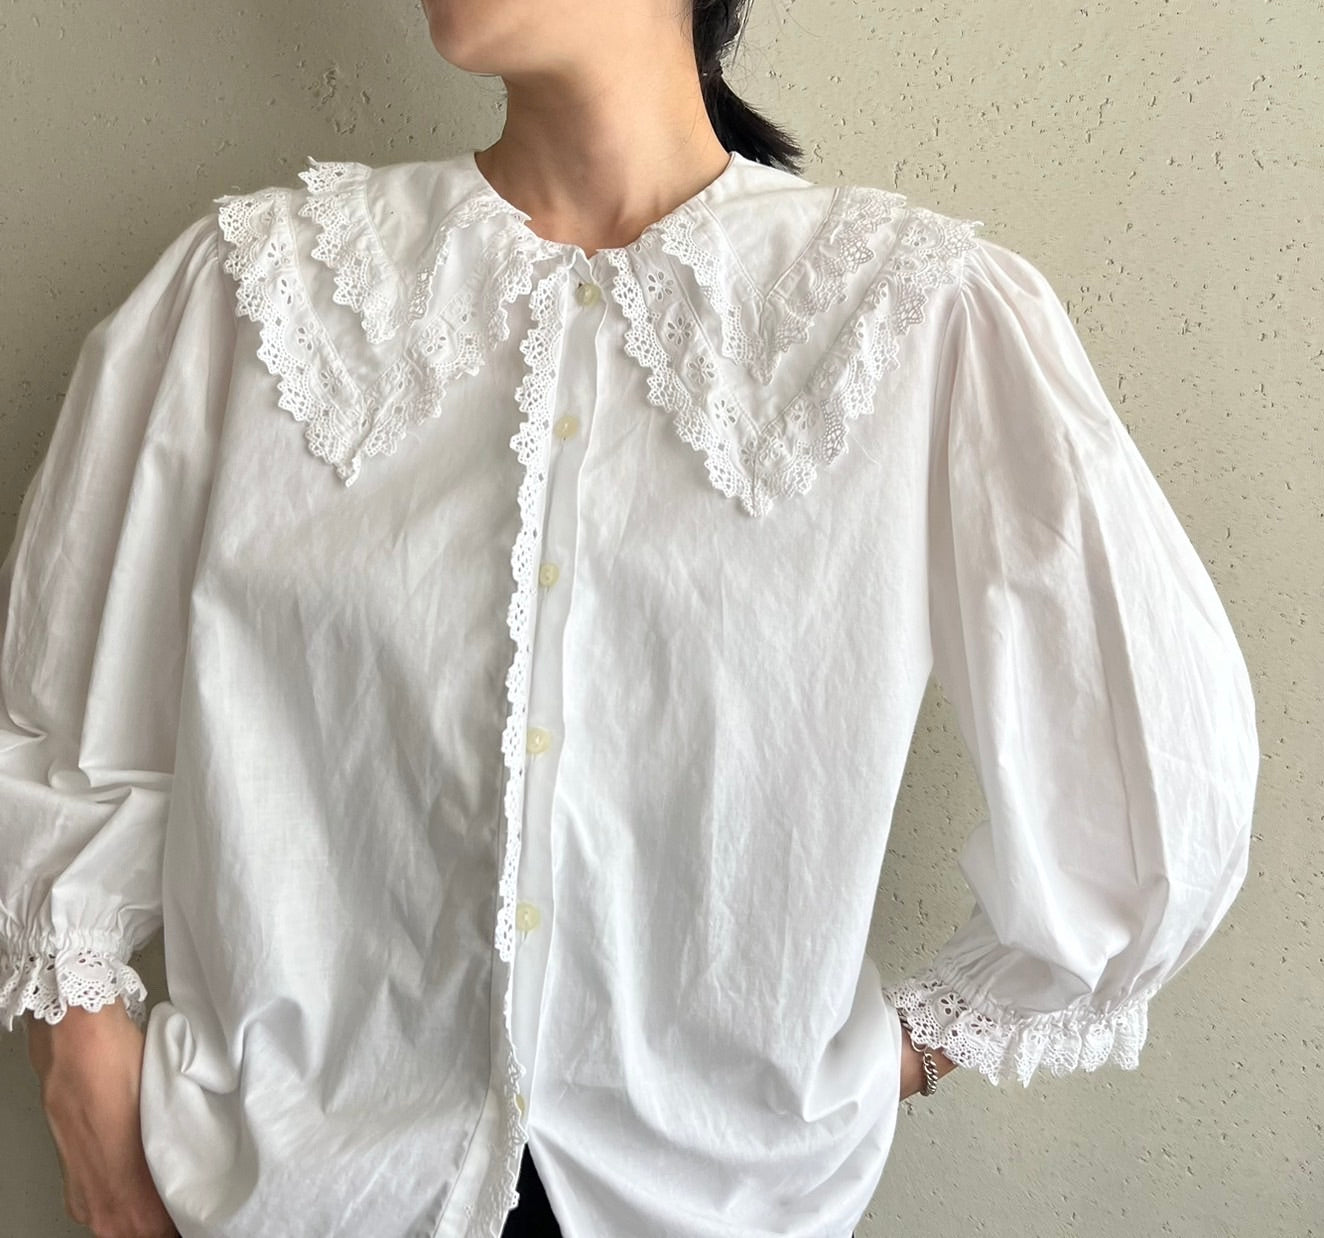 90s Cotton Lace Blouse Made in Austria